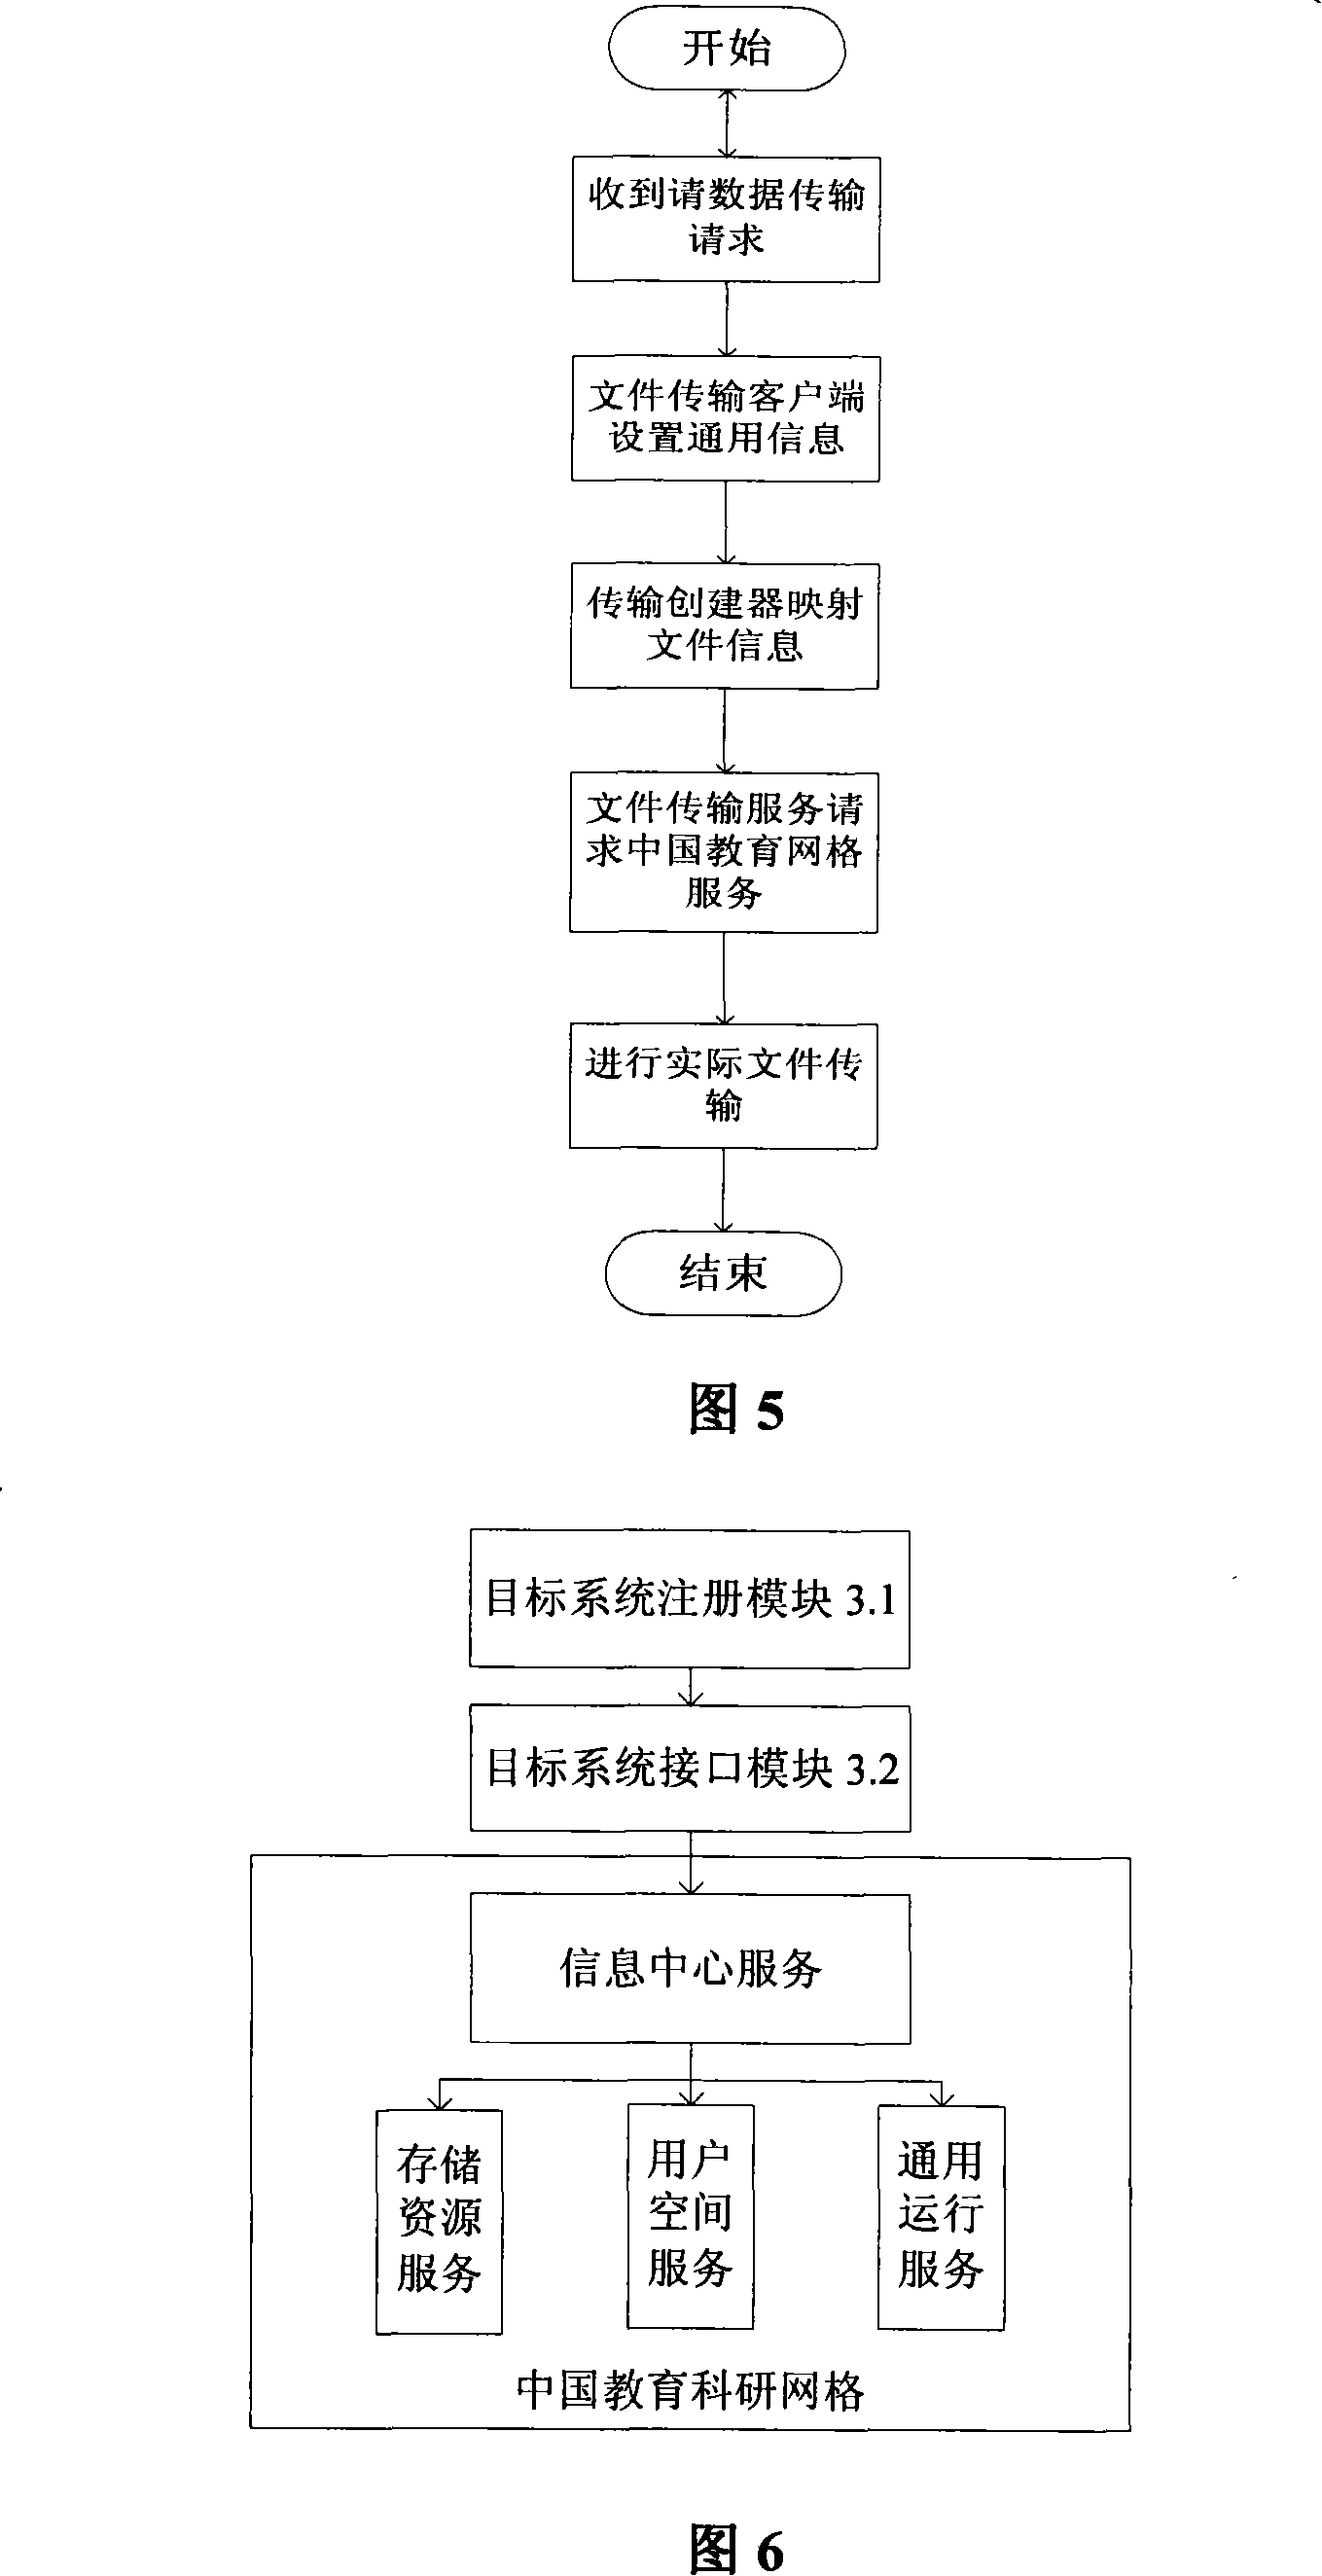 System for universal accesses to multi-cell platform